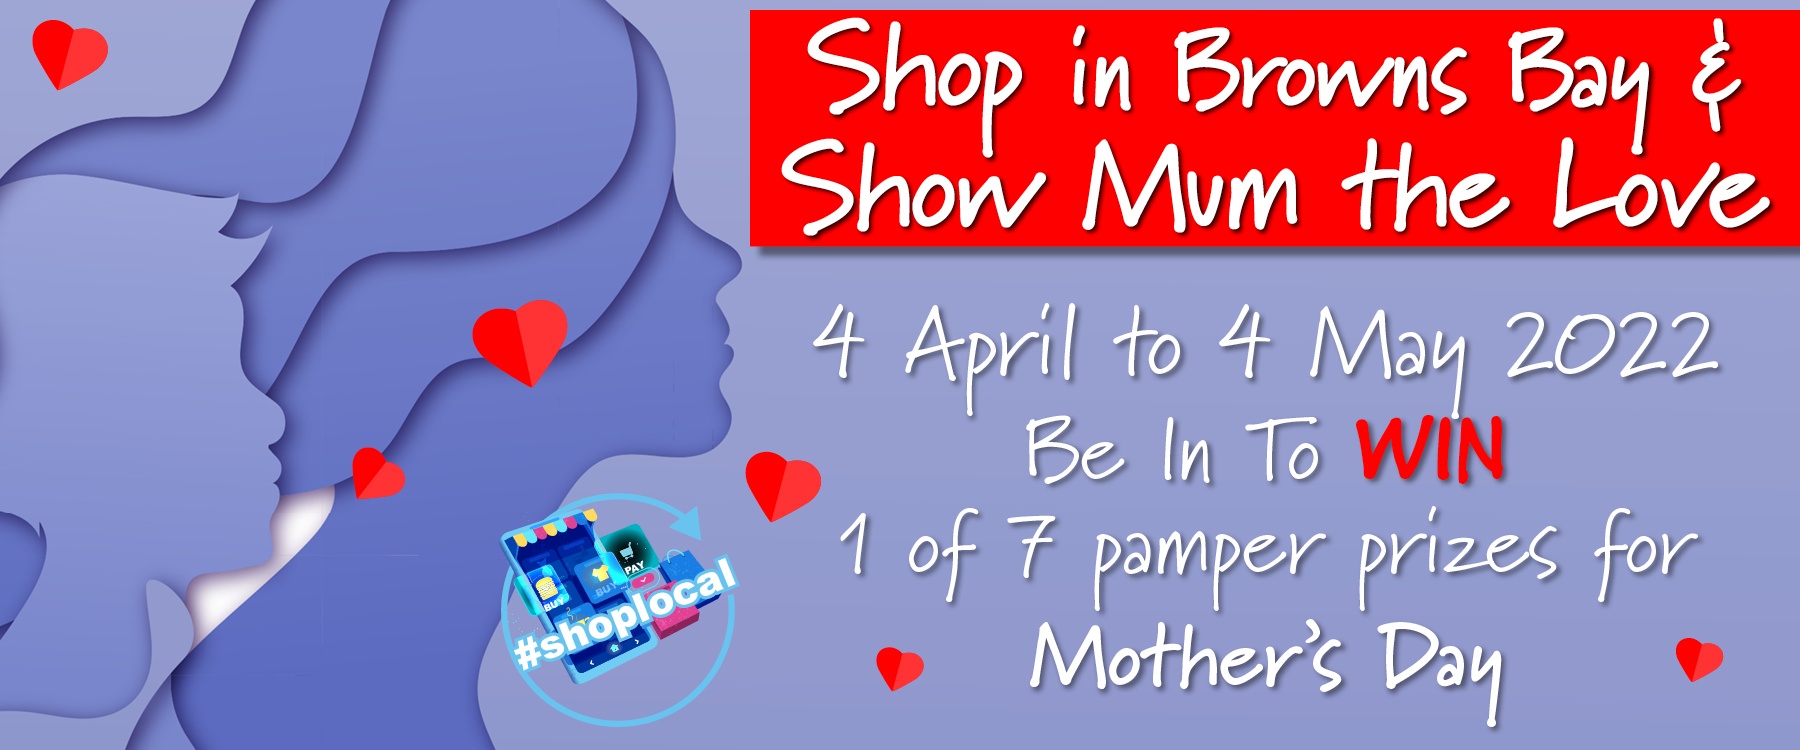 Shop in Browns Bay & Show Mum the Love